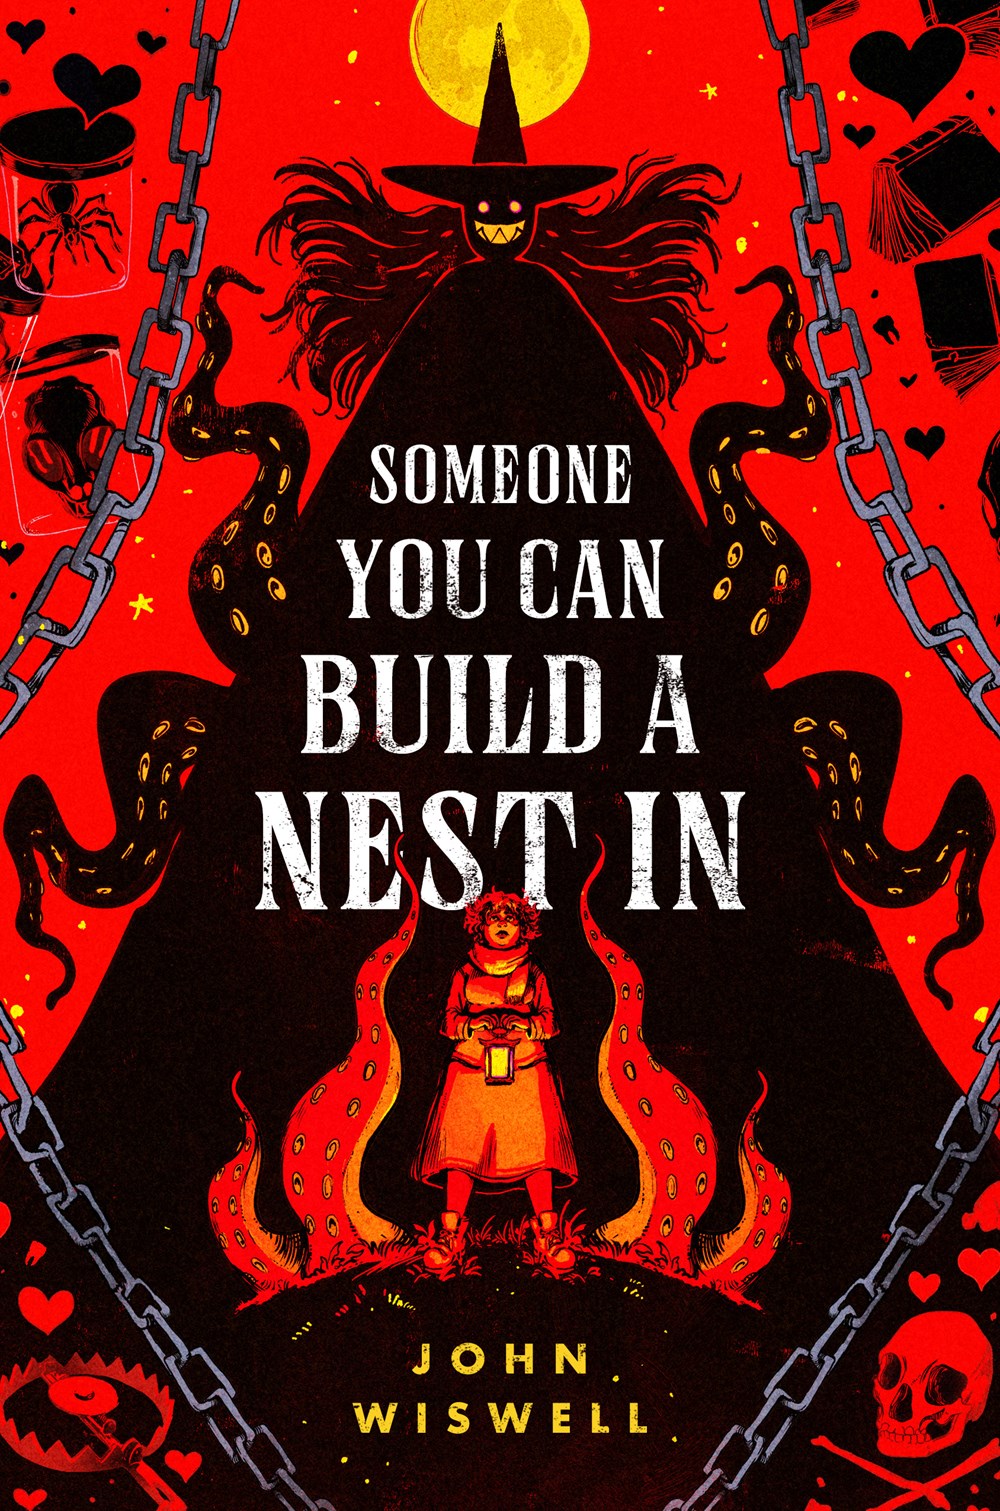 ‘Someone You Can Build a Nest In’ by John Wiswell | SFF Debut of the Month